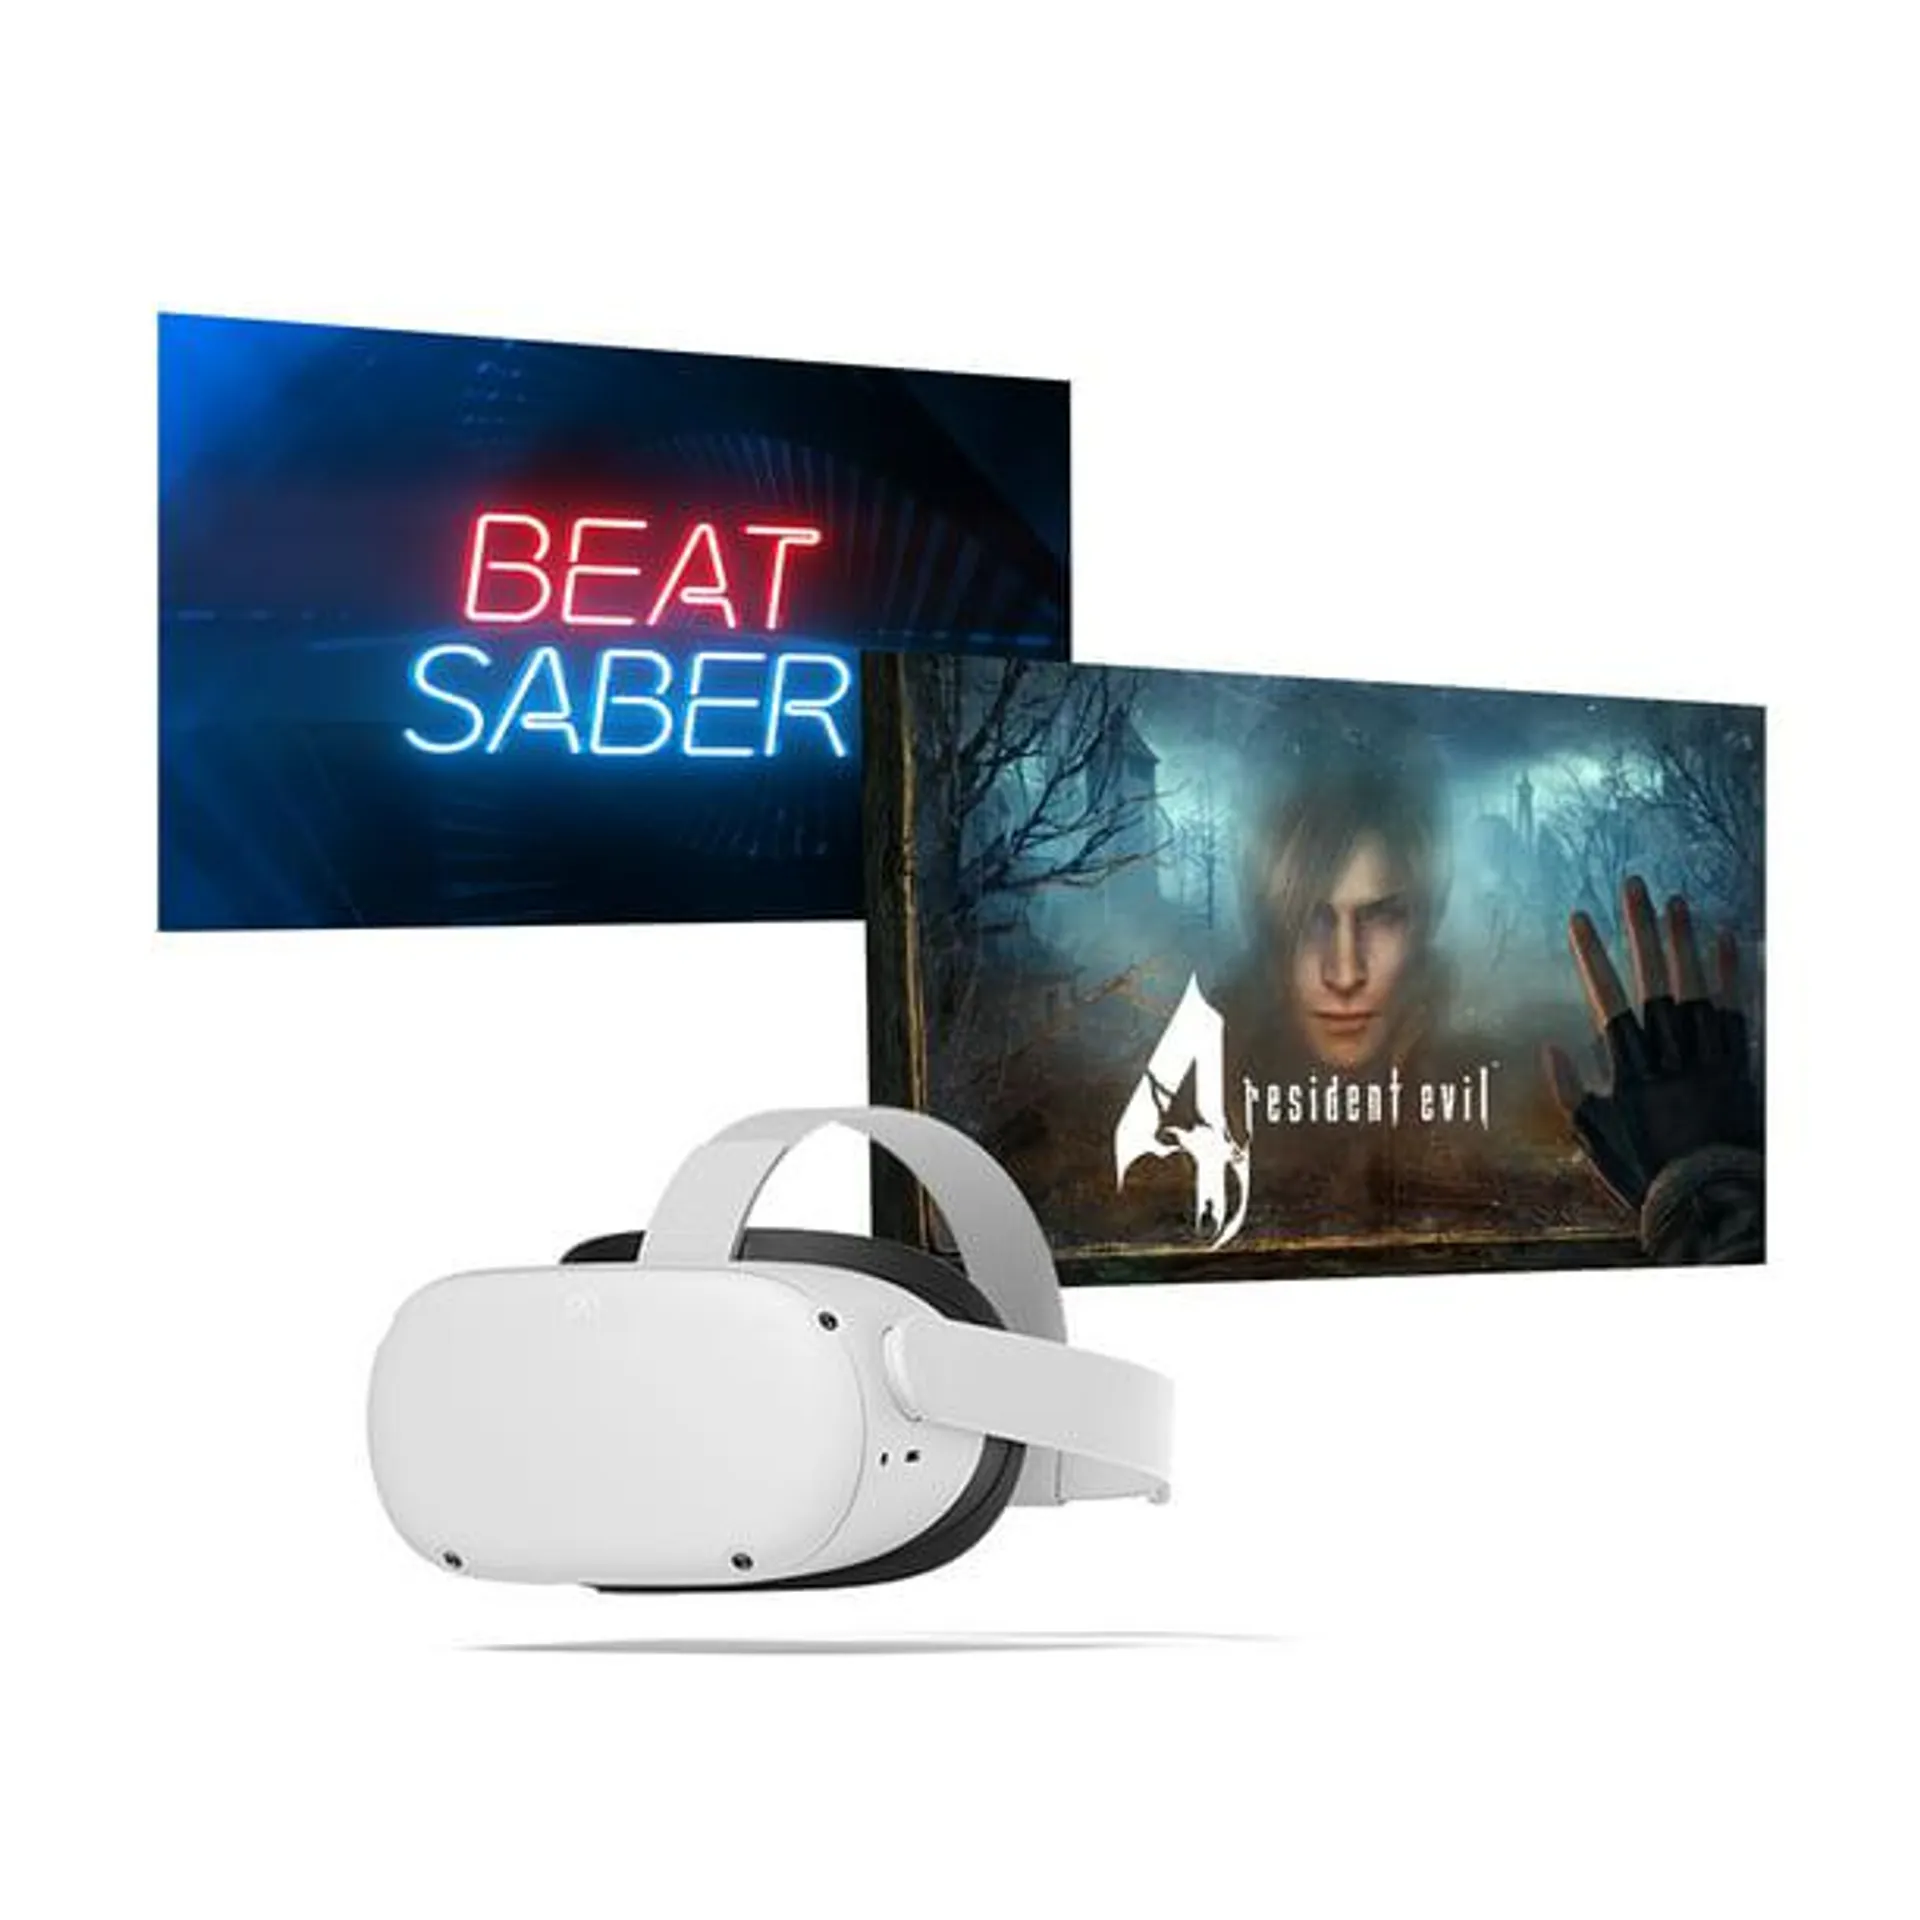 Meta Quest 2 (Oculus) — Advanced All-In-One Virtual Reality Headset — 128 GB with Resident Evil 4 and Beat Saber